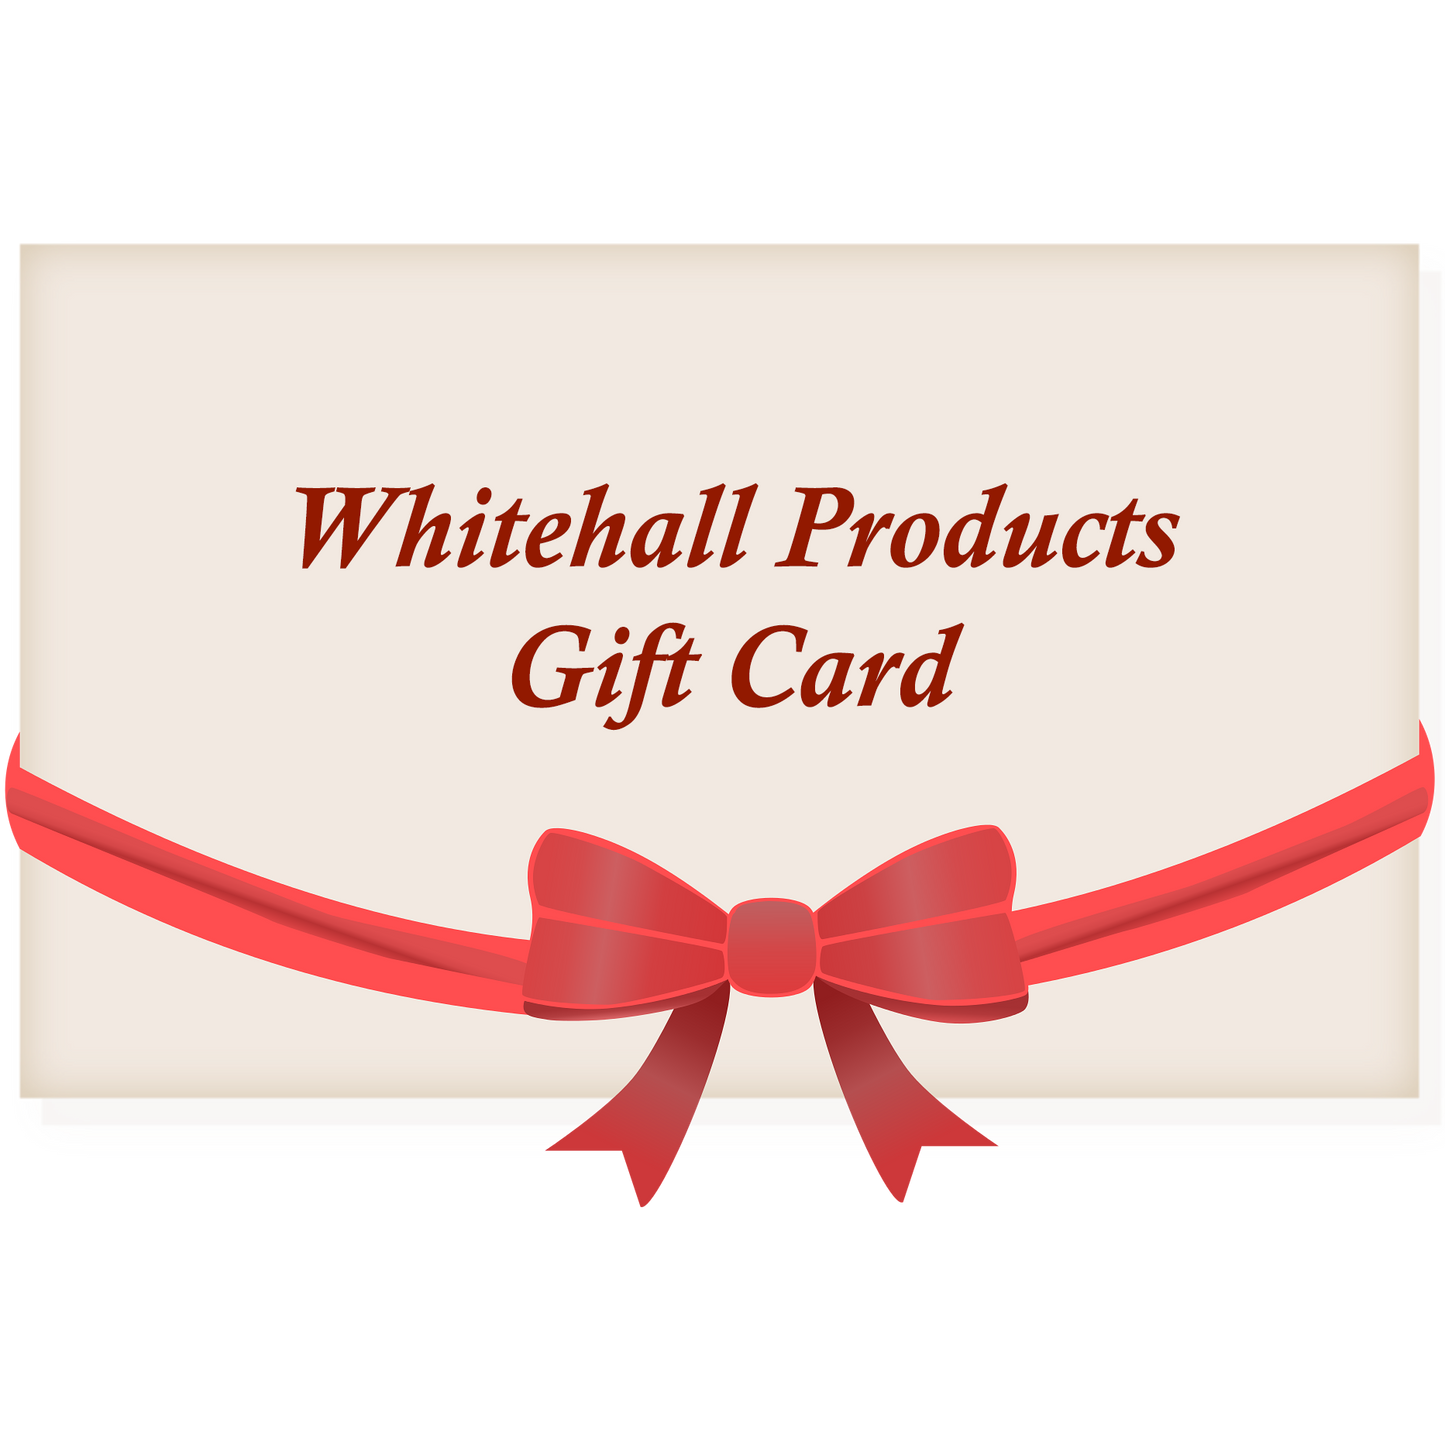 Whitehall Products Gift Card